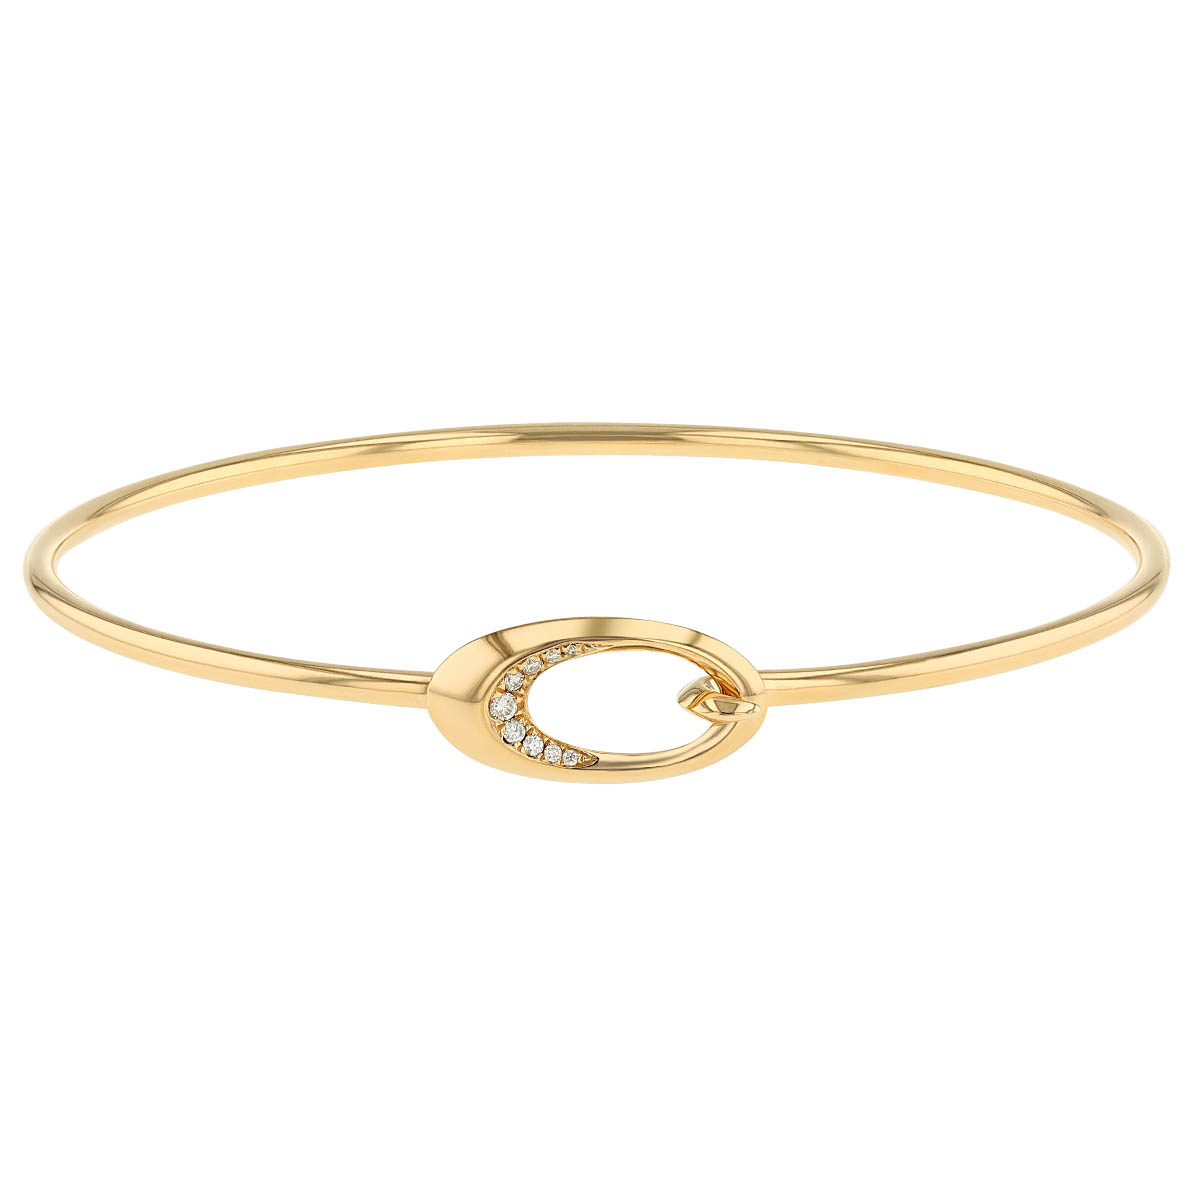 Diamond Tapered Oval Link Bangle Bracelet in Yellow Gold | Borsheims